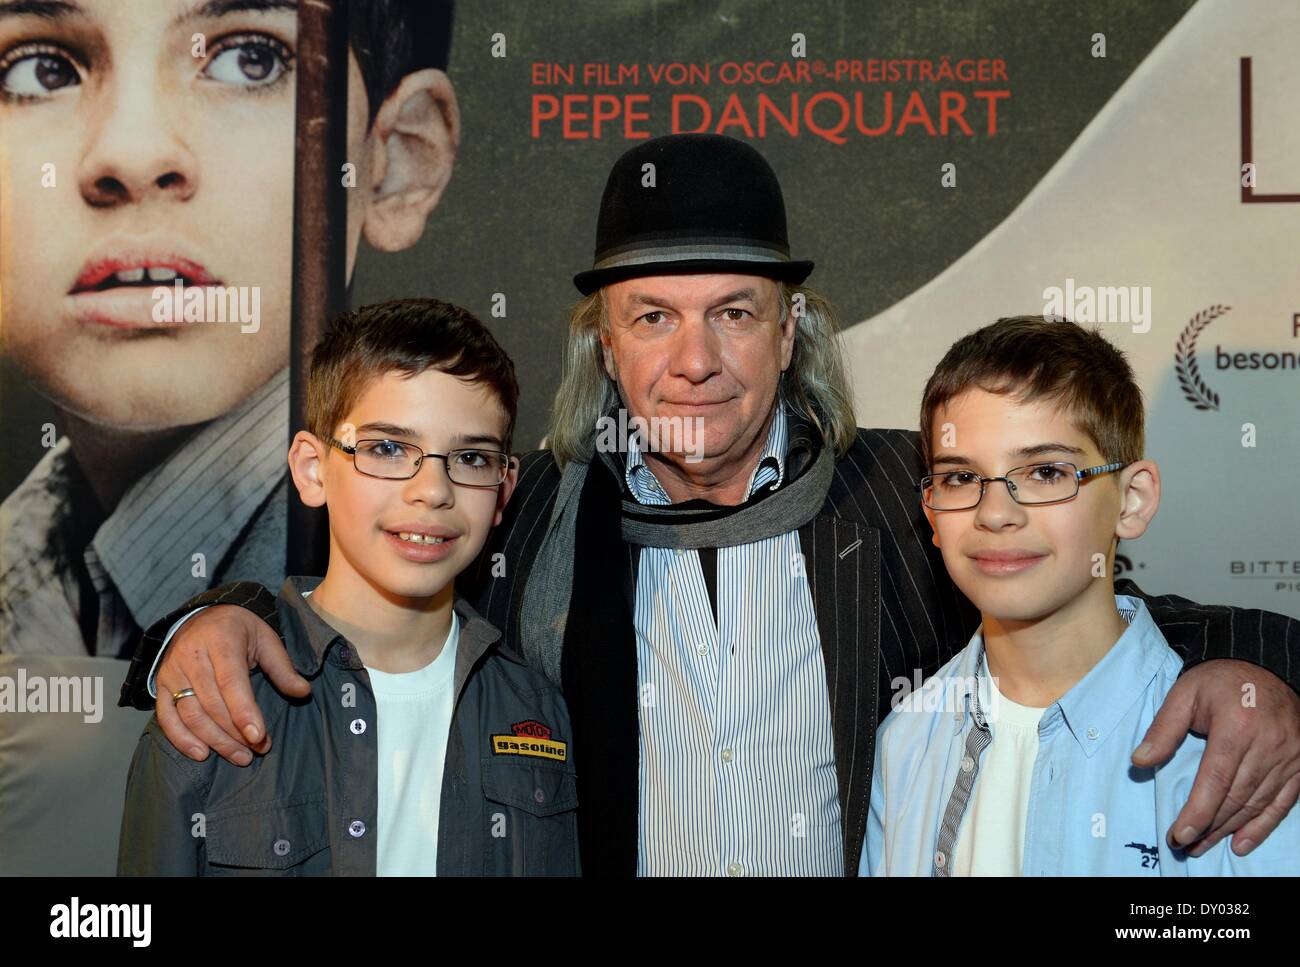 German director Pepe Danquart poses with Polish actors and cast members Kamil Tkacz (L) and Andrzej Tkacz (R) prior the German premiere of 'Lauf Junge Lauf' (lit: Run Boy Run) in Halle an der Saale, Germany, 01 April 2014. The German-French-Polish co-production starts across German theaters on 17 April. Photo: Hendrik Schmidt/dpa Stock Photo